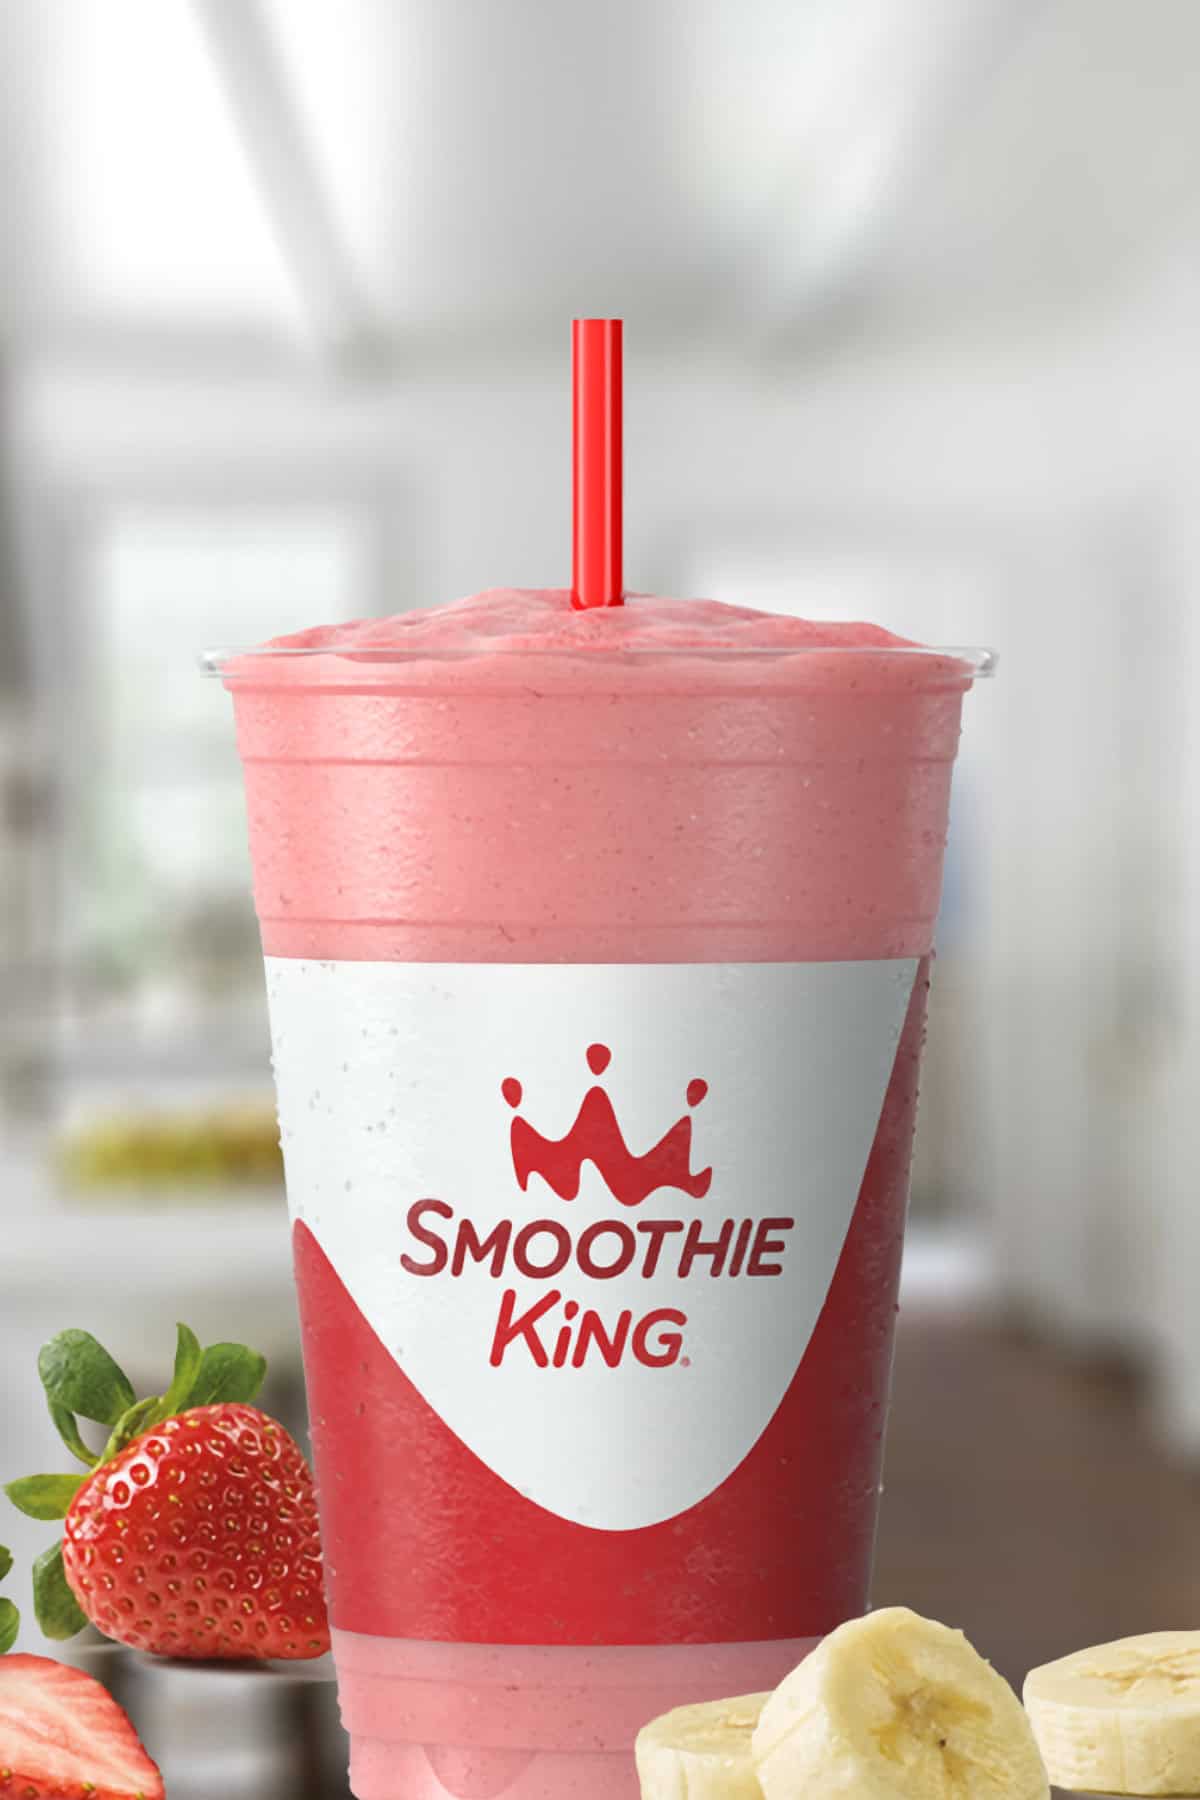 Smoothie King Kids Lil Angel smoothie in a glass, on my kitchen counter, surrounded by fresh strawberries and bananas.